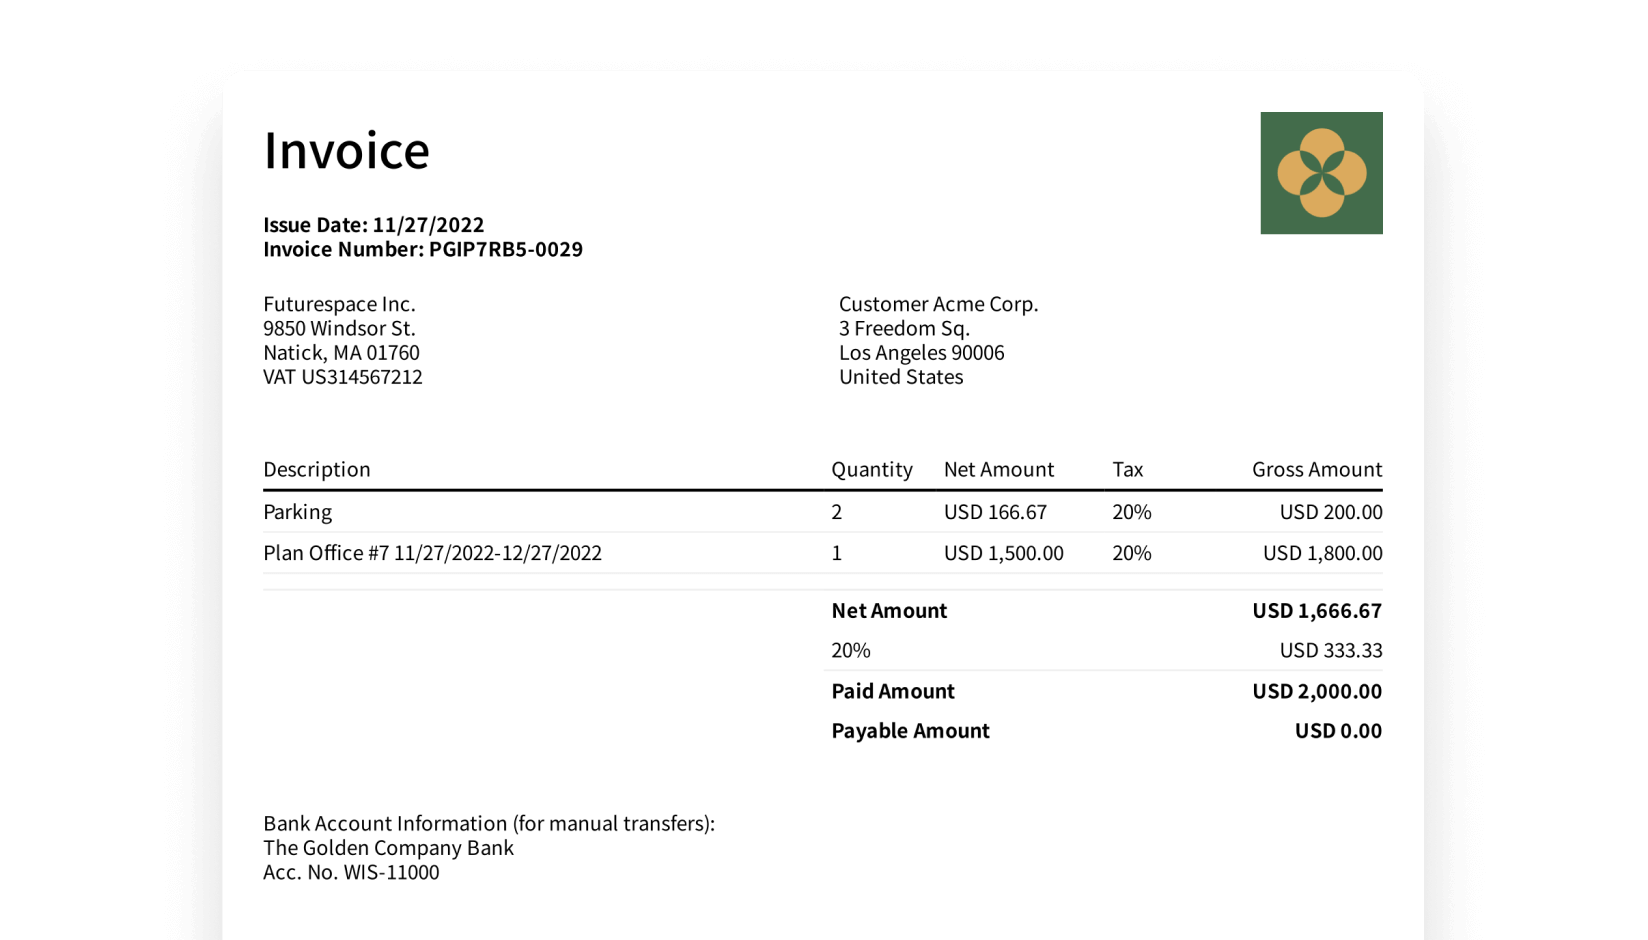 New Look of Invoices and Receipts